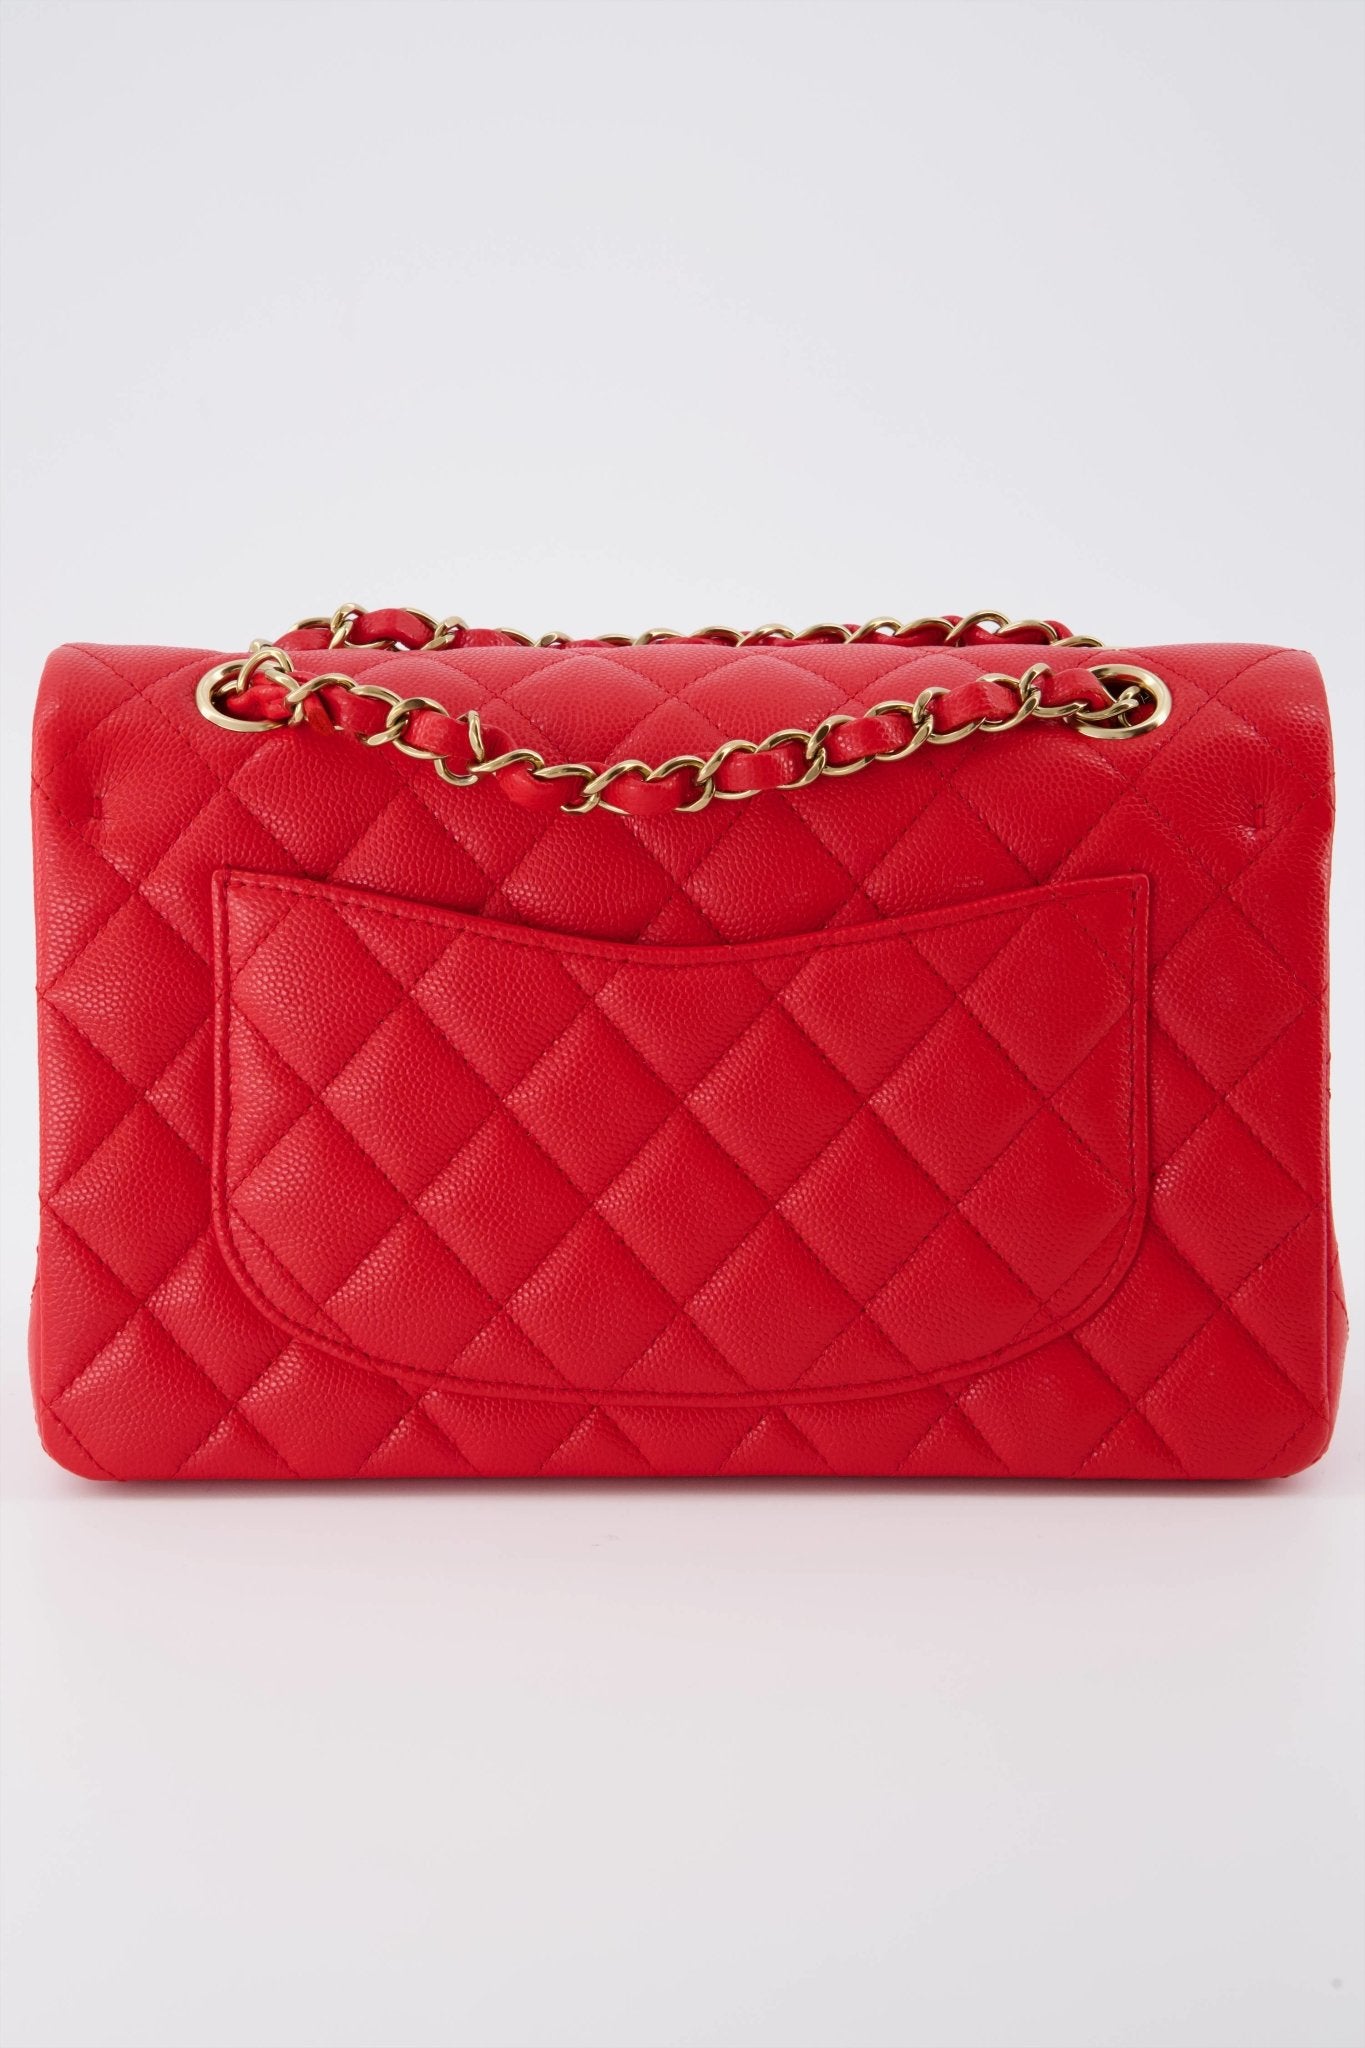 The Best Vintage Chanel Bags to Collect Now | Handbags and Accessories |  Sotheby's